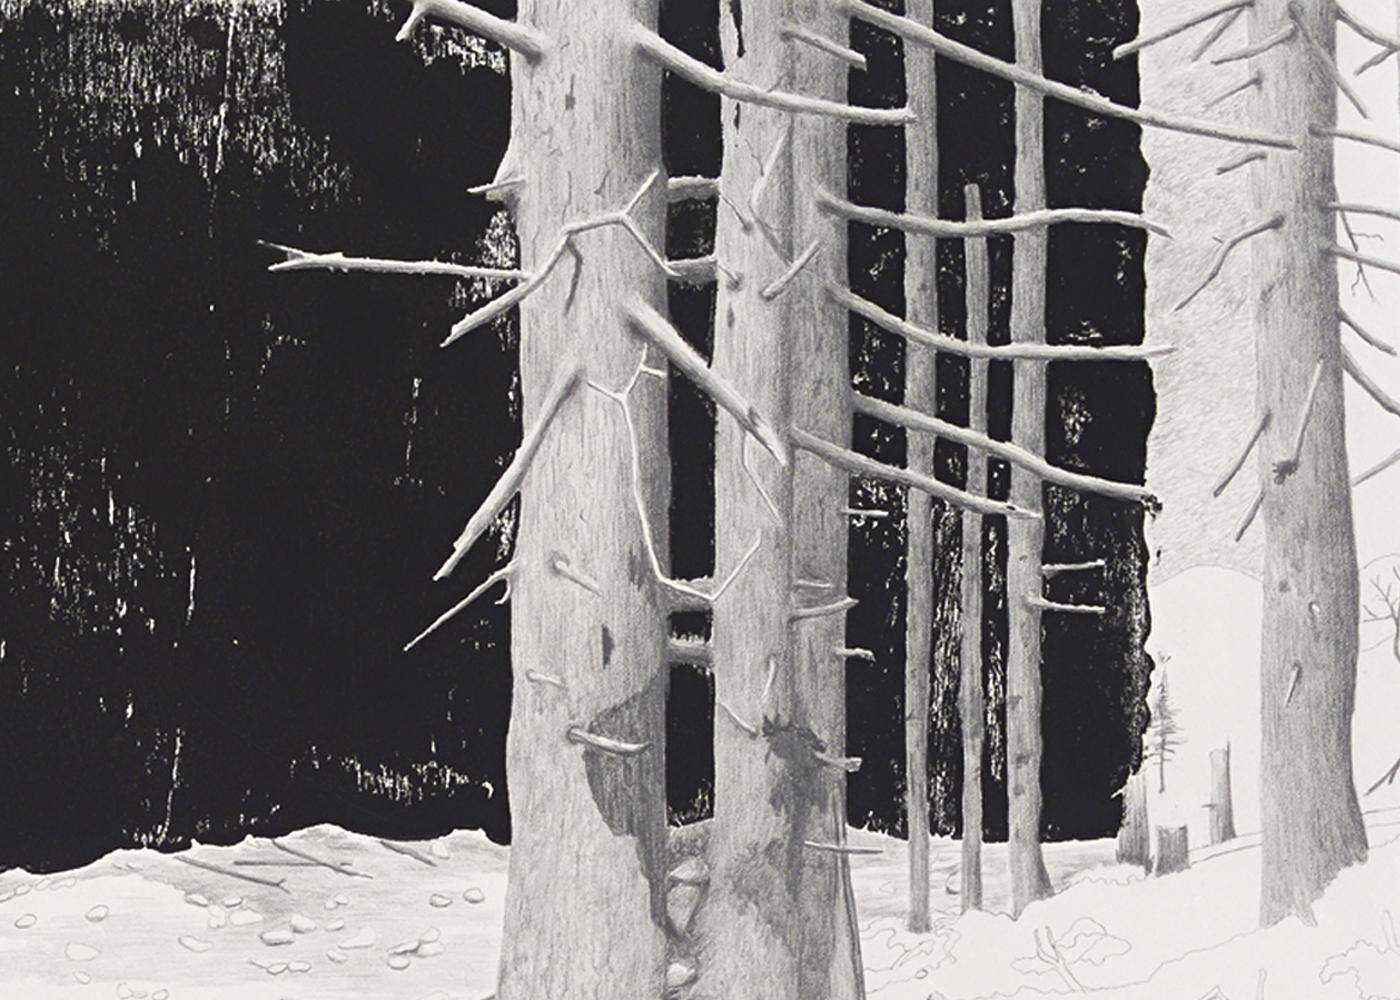 C G Schmidt, Schneise 1, woodblock print with pencil drawing of forest clearing - Realist Art by Christiane Gerda Schmidt